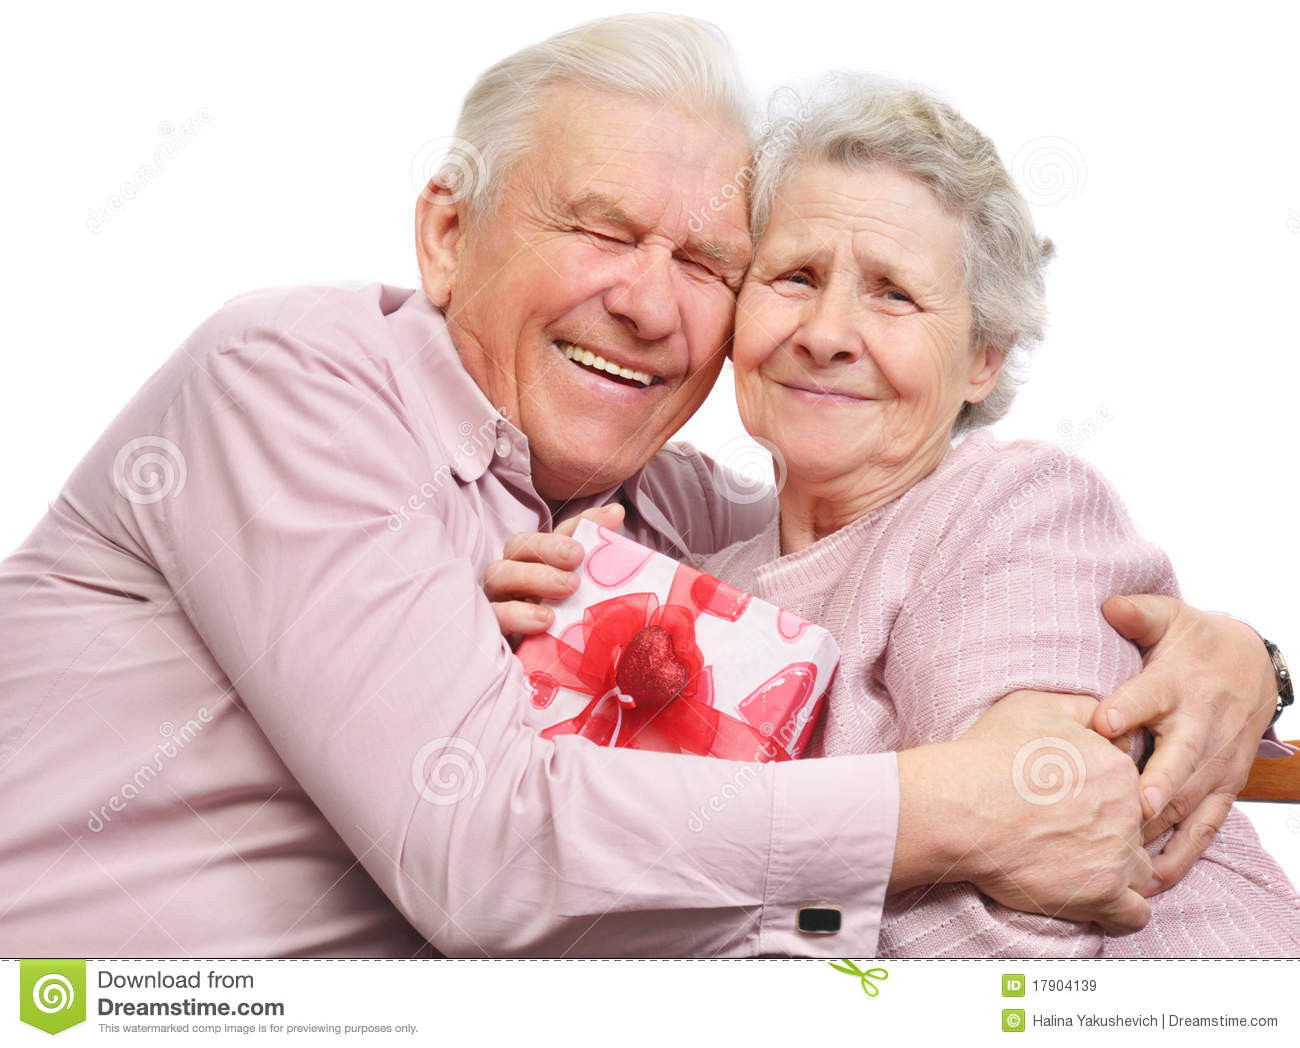 Gift Ideas For Elderly Couple
 Smiling Elderly Couple And Box With Gift Royalty Free